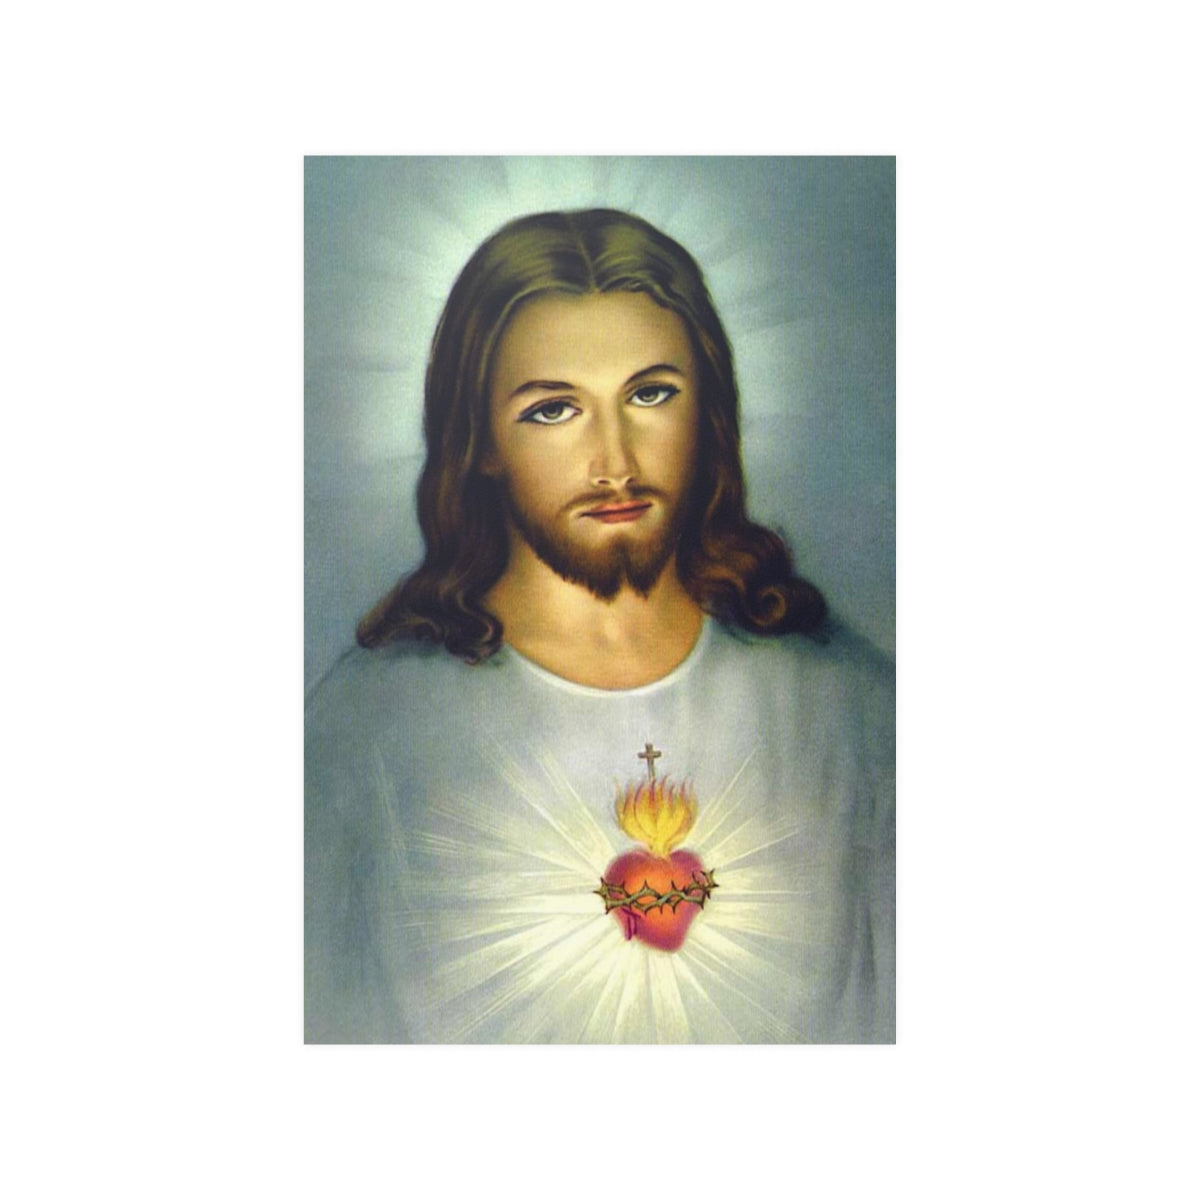 The Sacred Heart and Divine Mercy